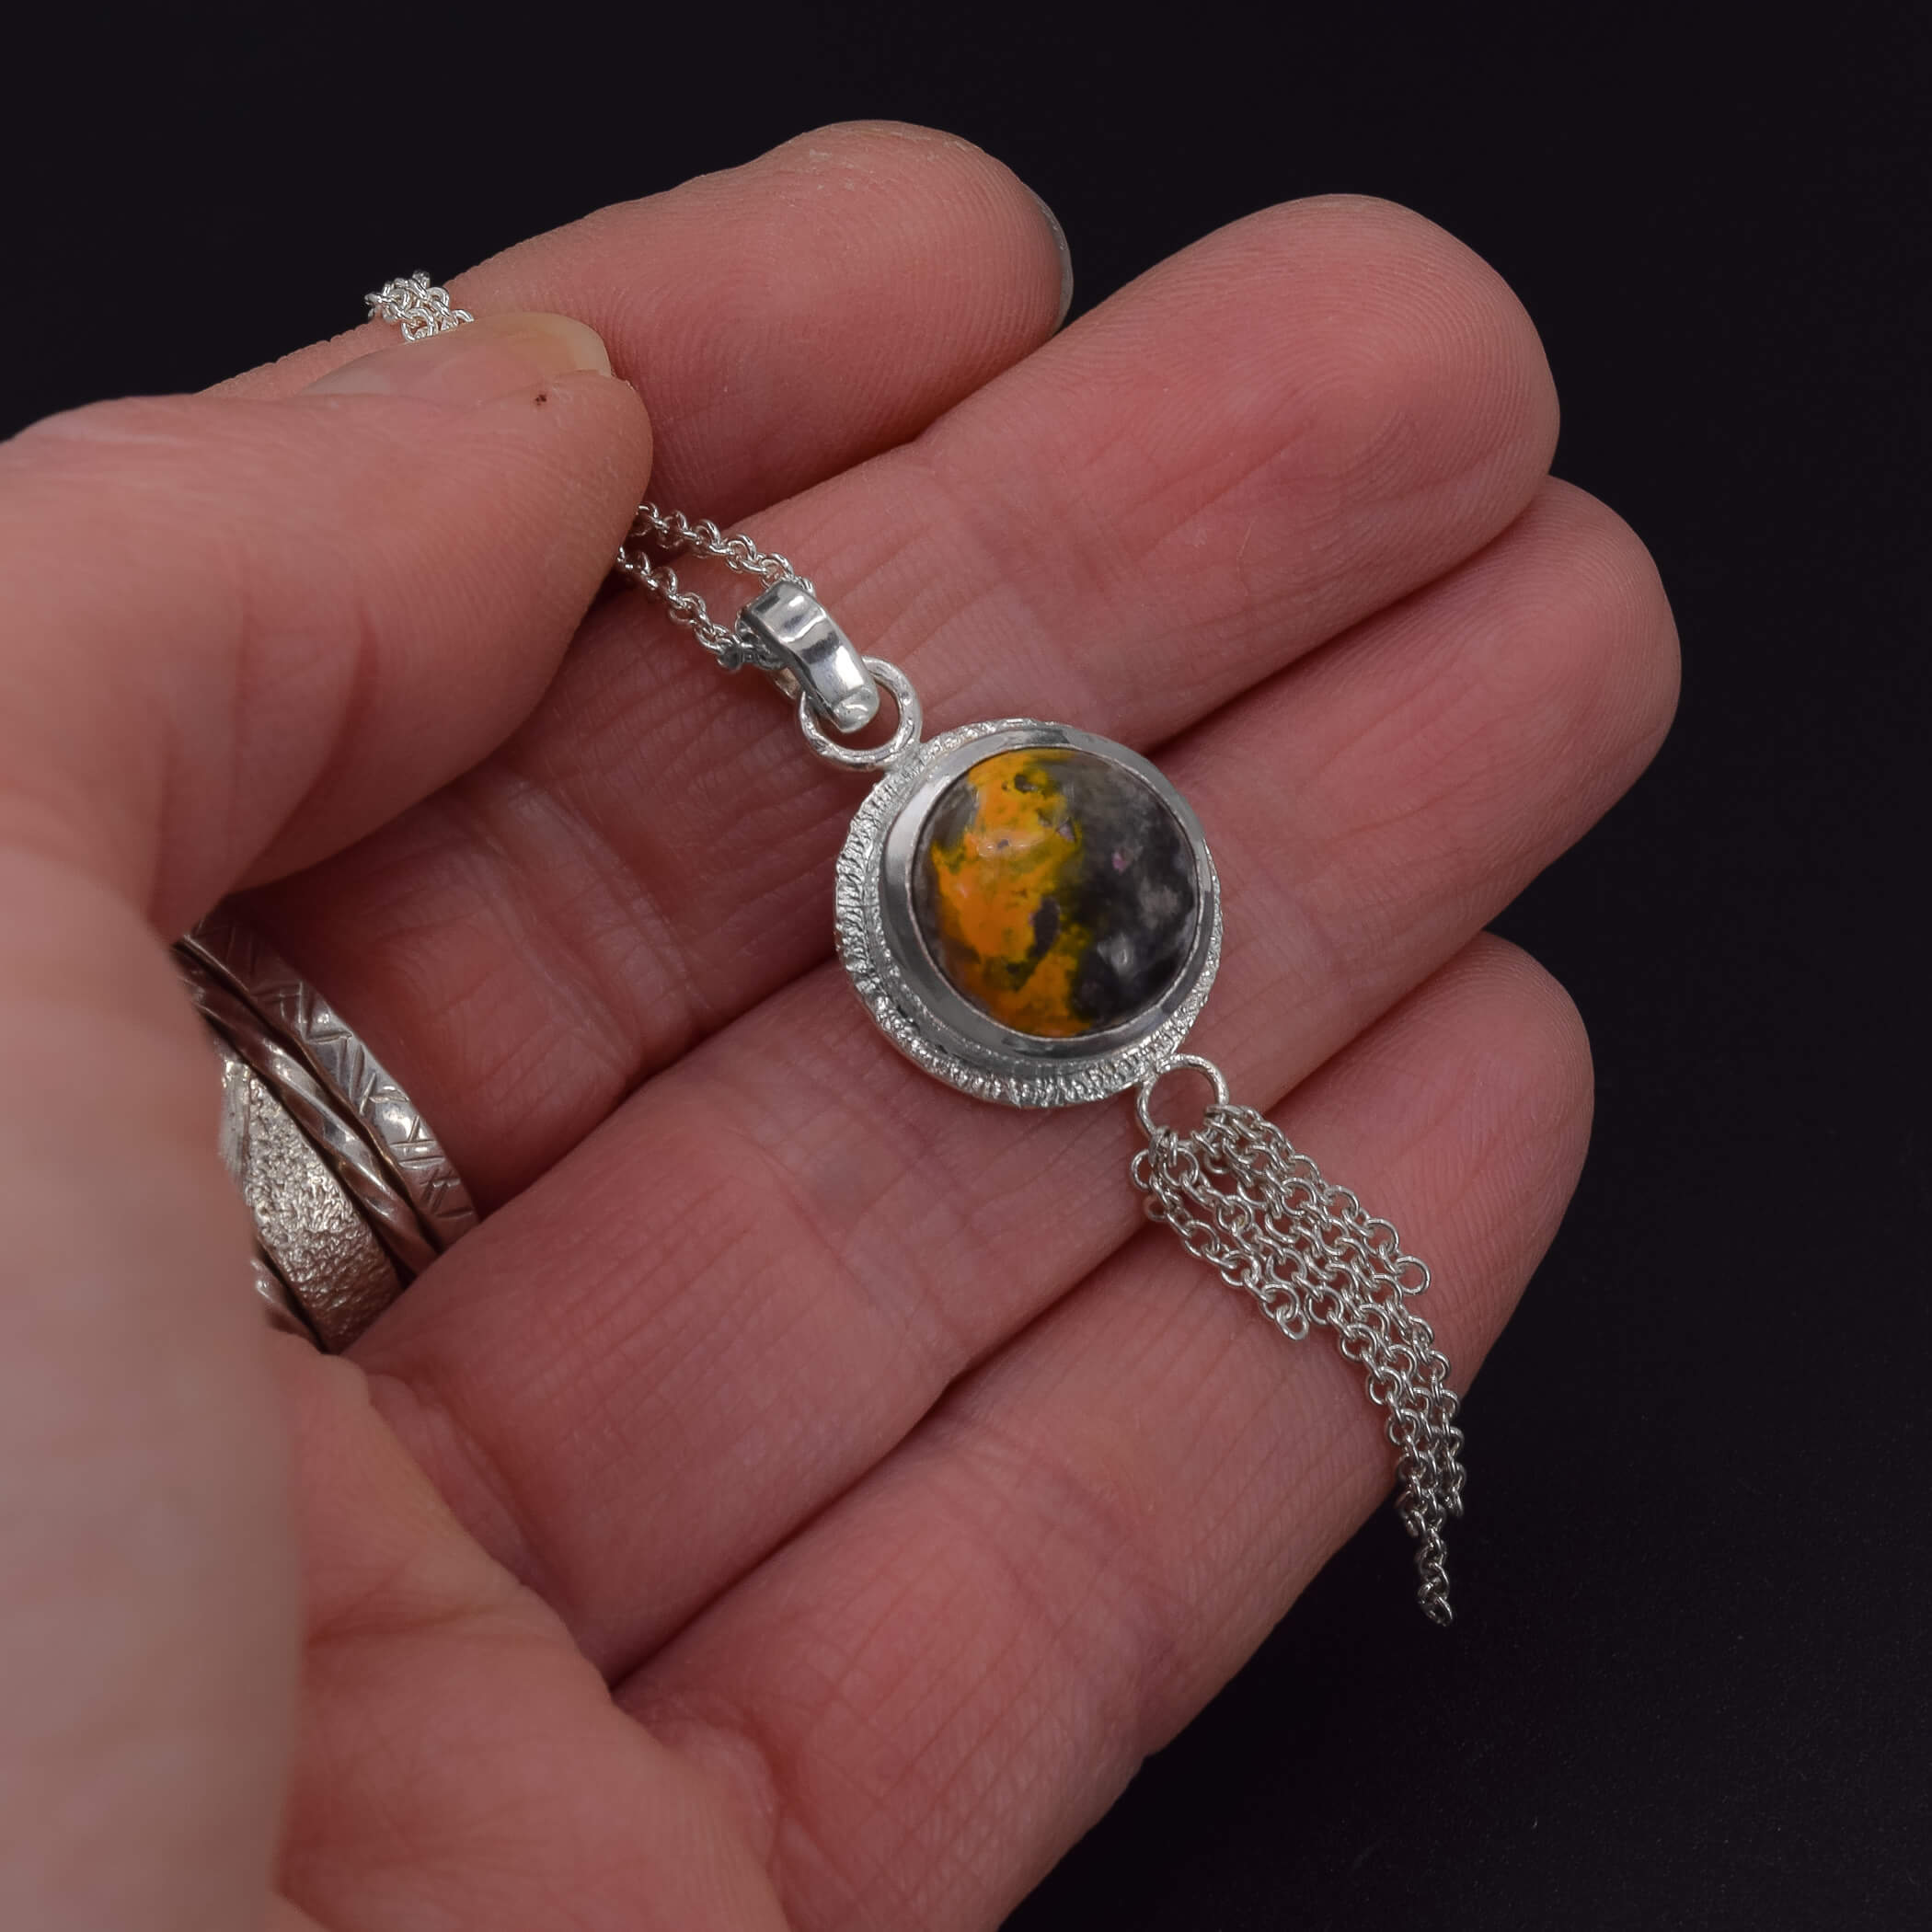 sterling silver necklace featuring a round bumblebee jasper stone, with a stardust texture around the edges and a chain embellishment at the bottom of the pendant shown in hand for scale